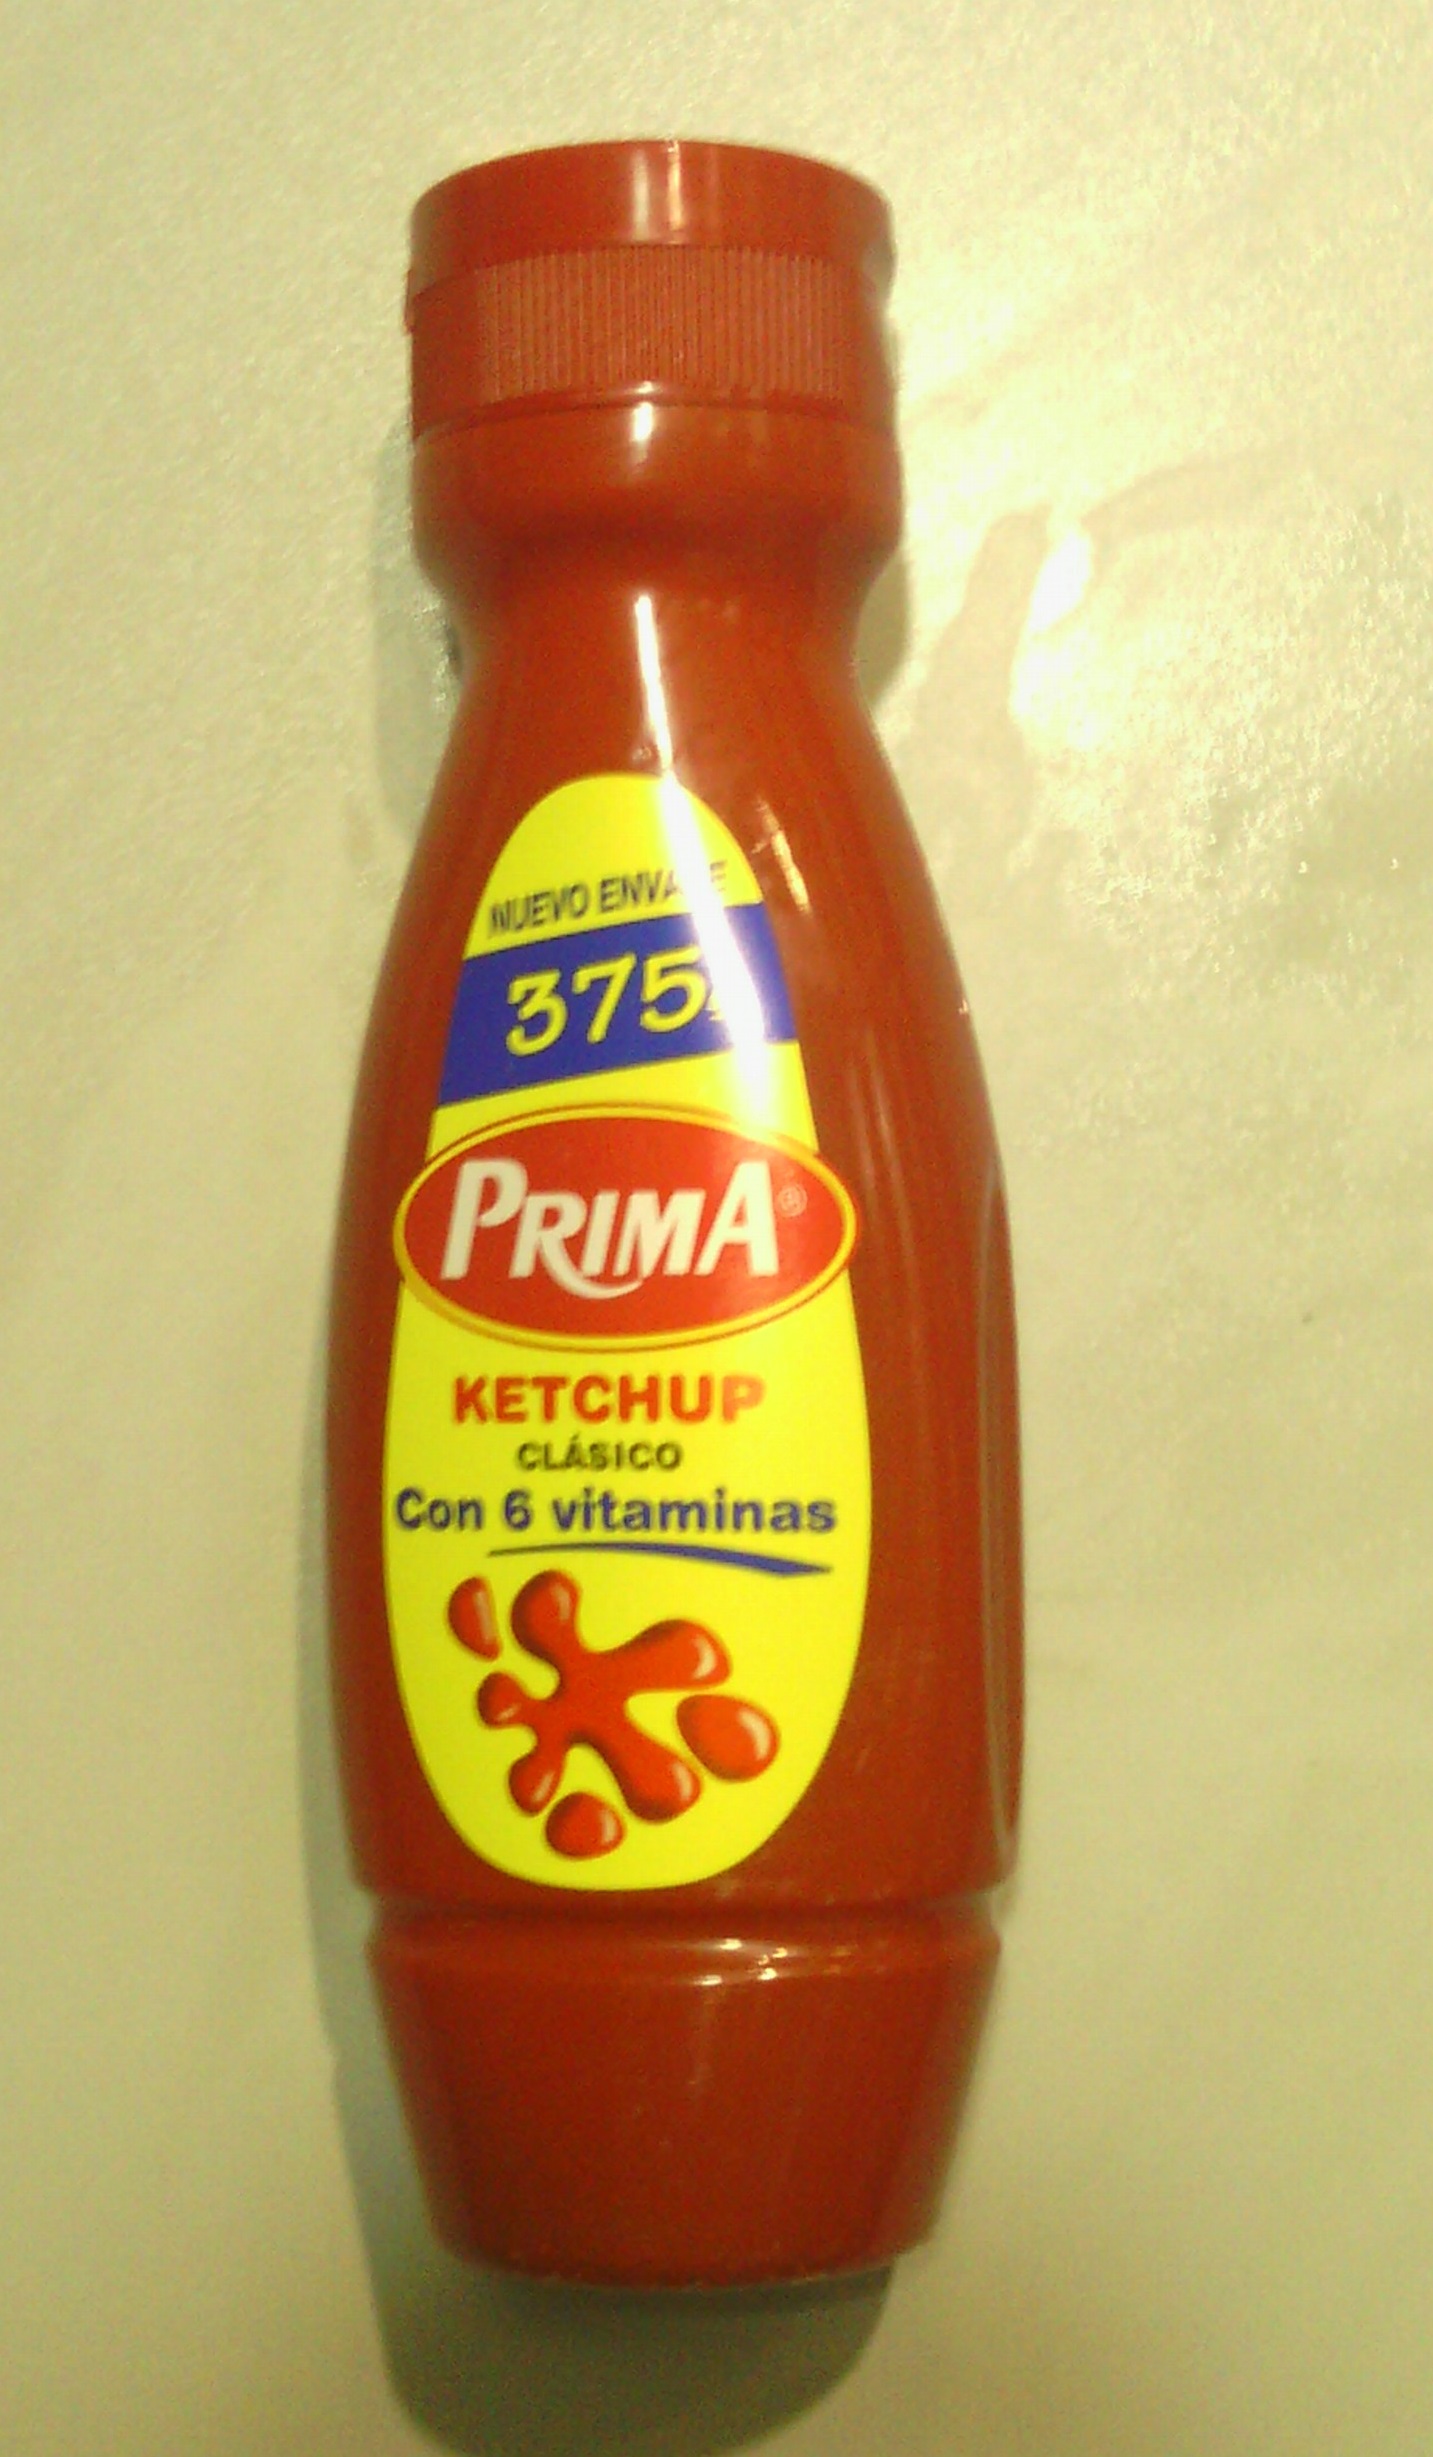 KETCHUP PRIMA CLASICO 800 GRS.